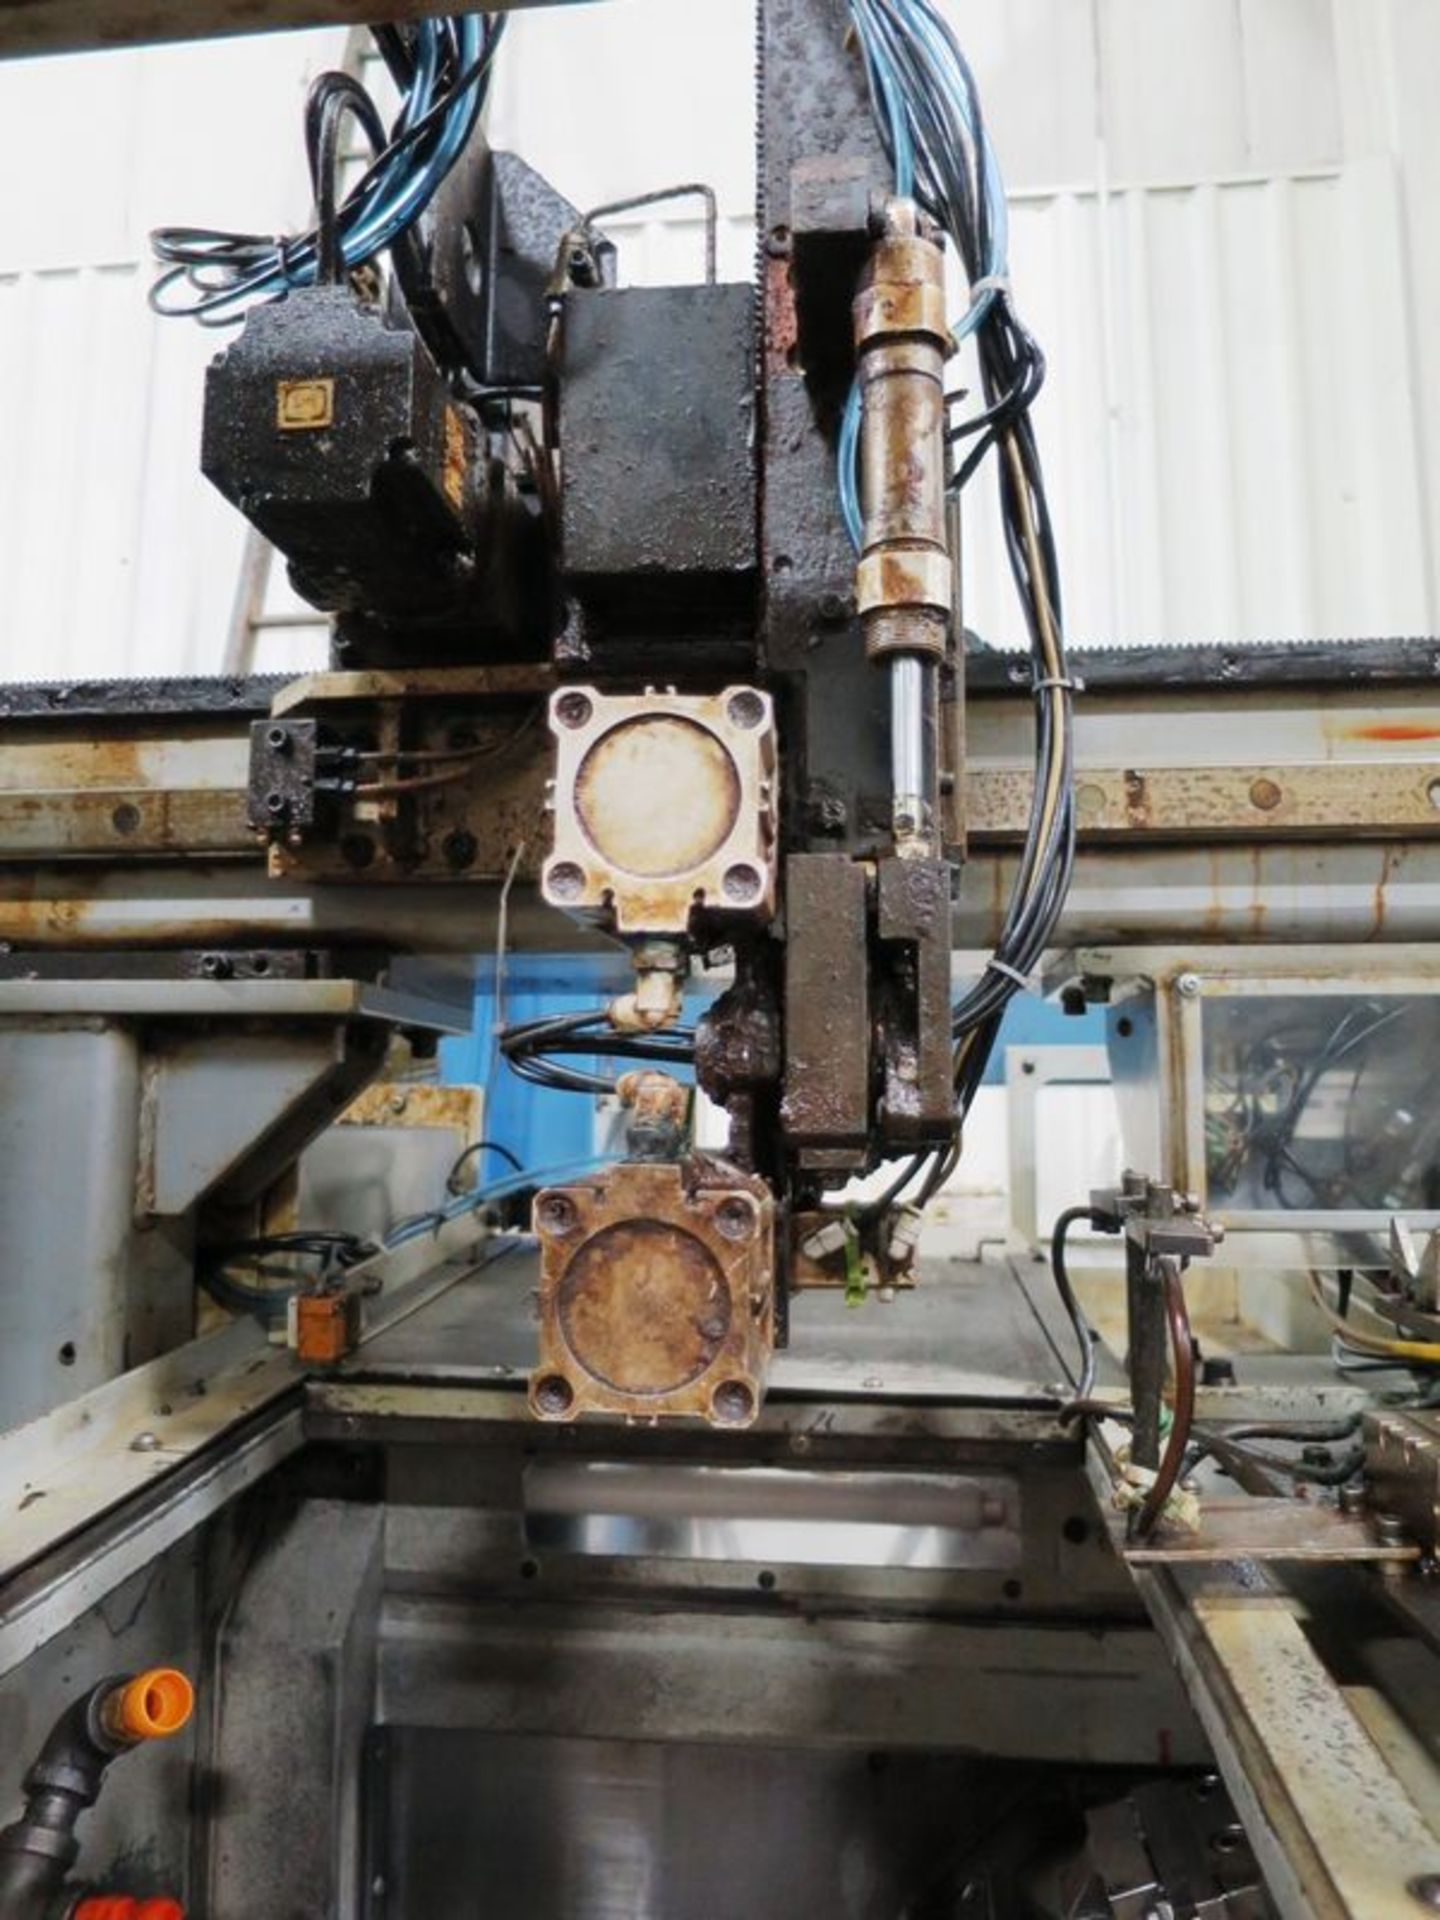 Takamaz XD-101 CNC Twin Spindle Turning Center with Gantry Loading System, S/N 300444, New 2006 - Image 7 of 13